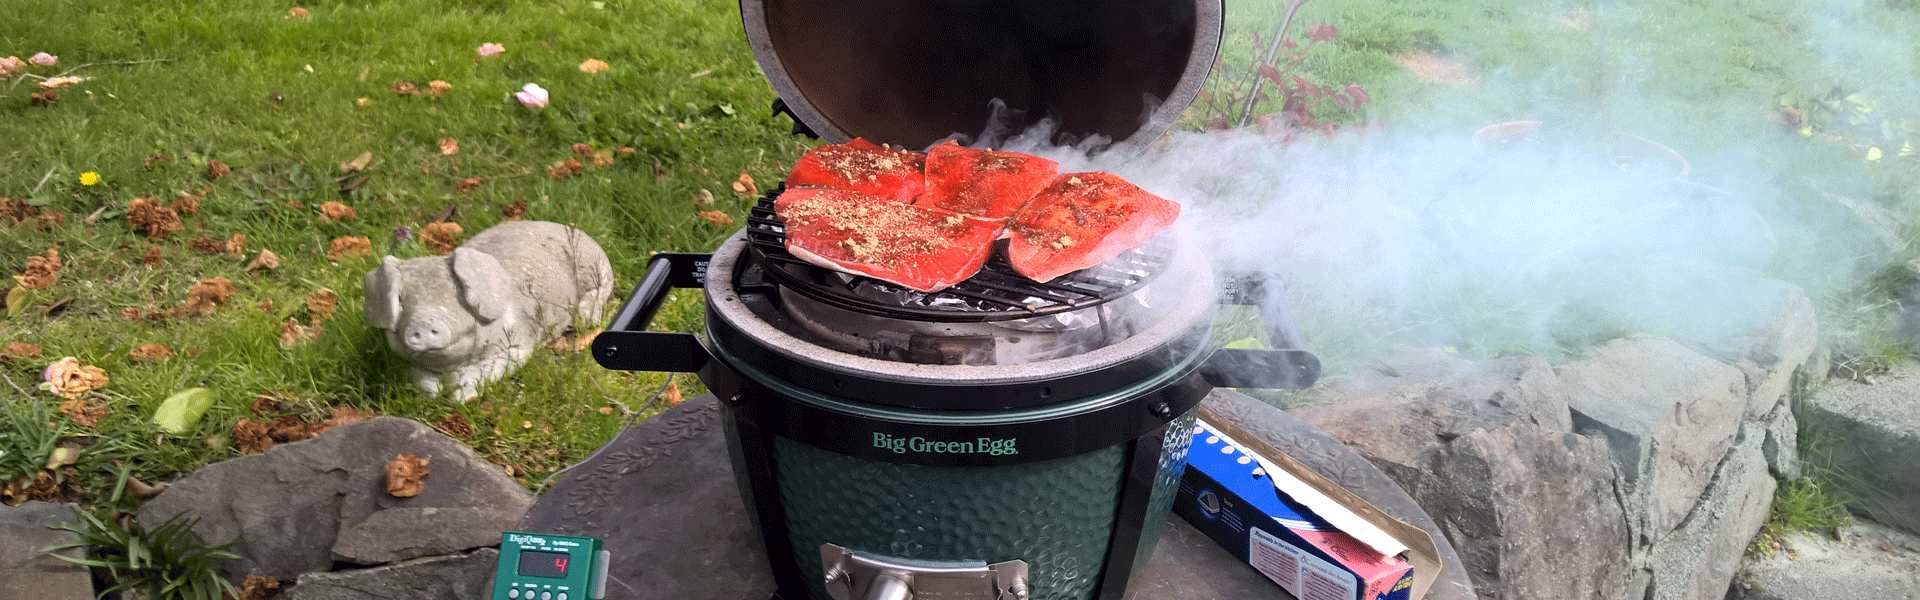 Camping with the Big Green Egg